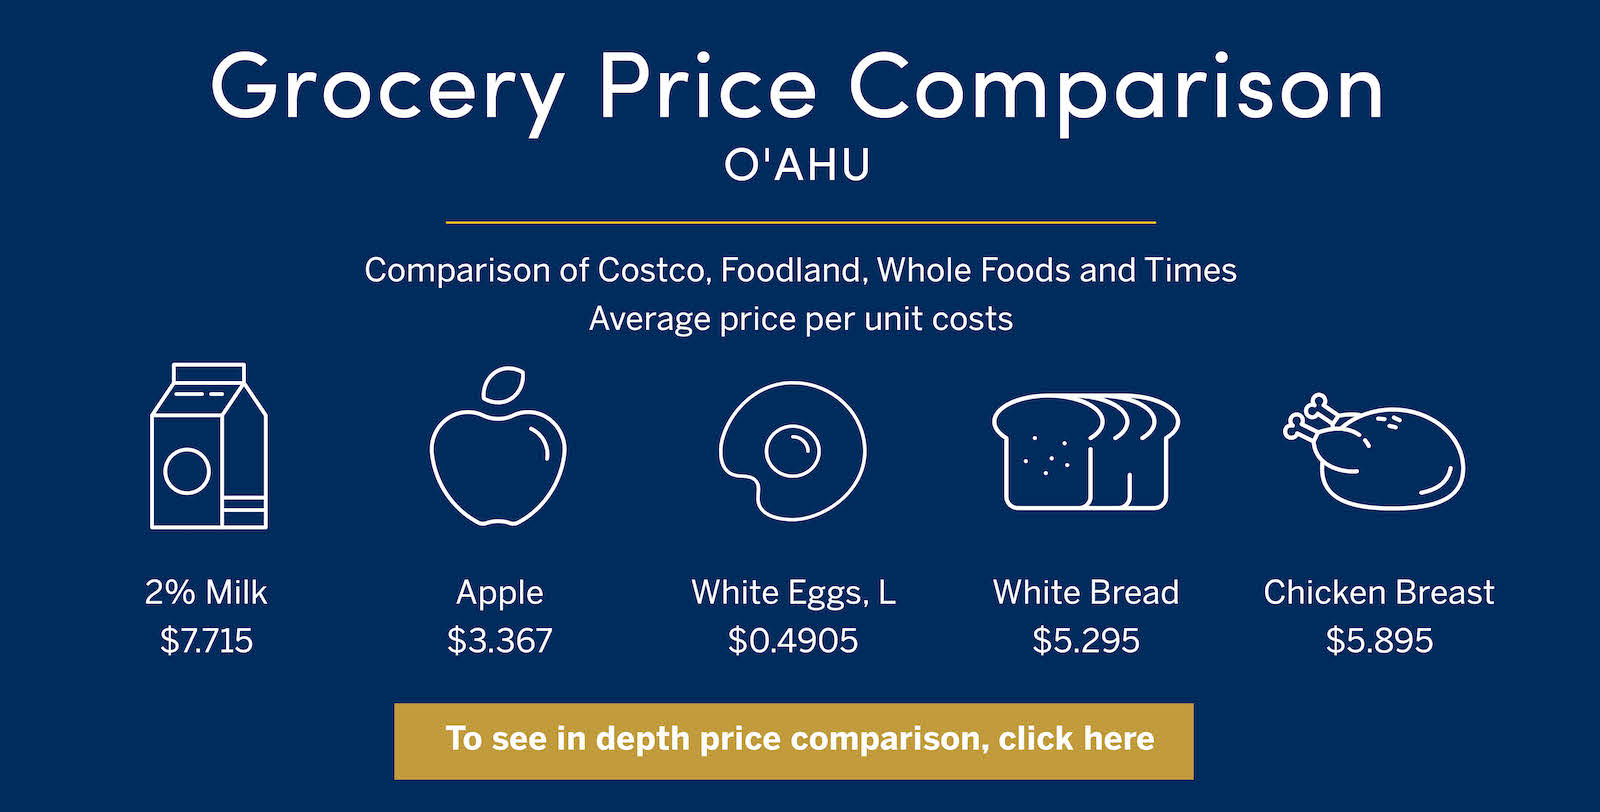 Comparison of Oahu grocery prices